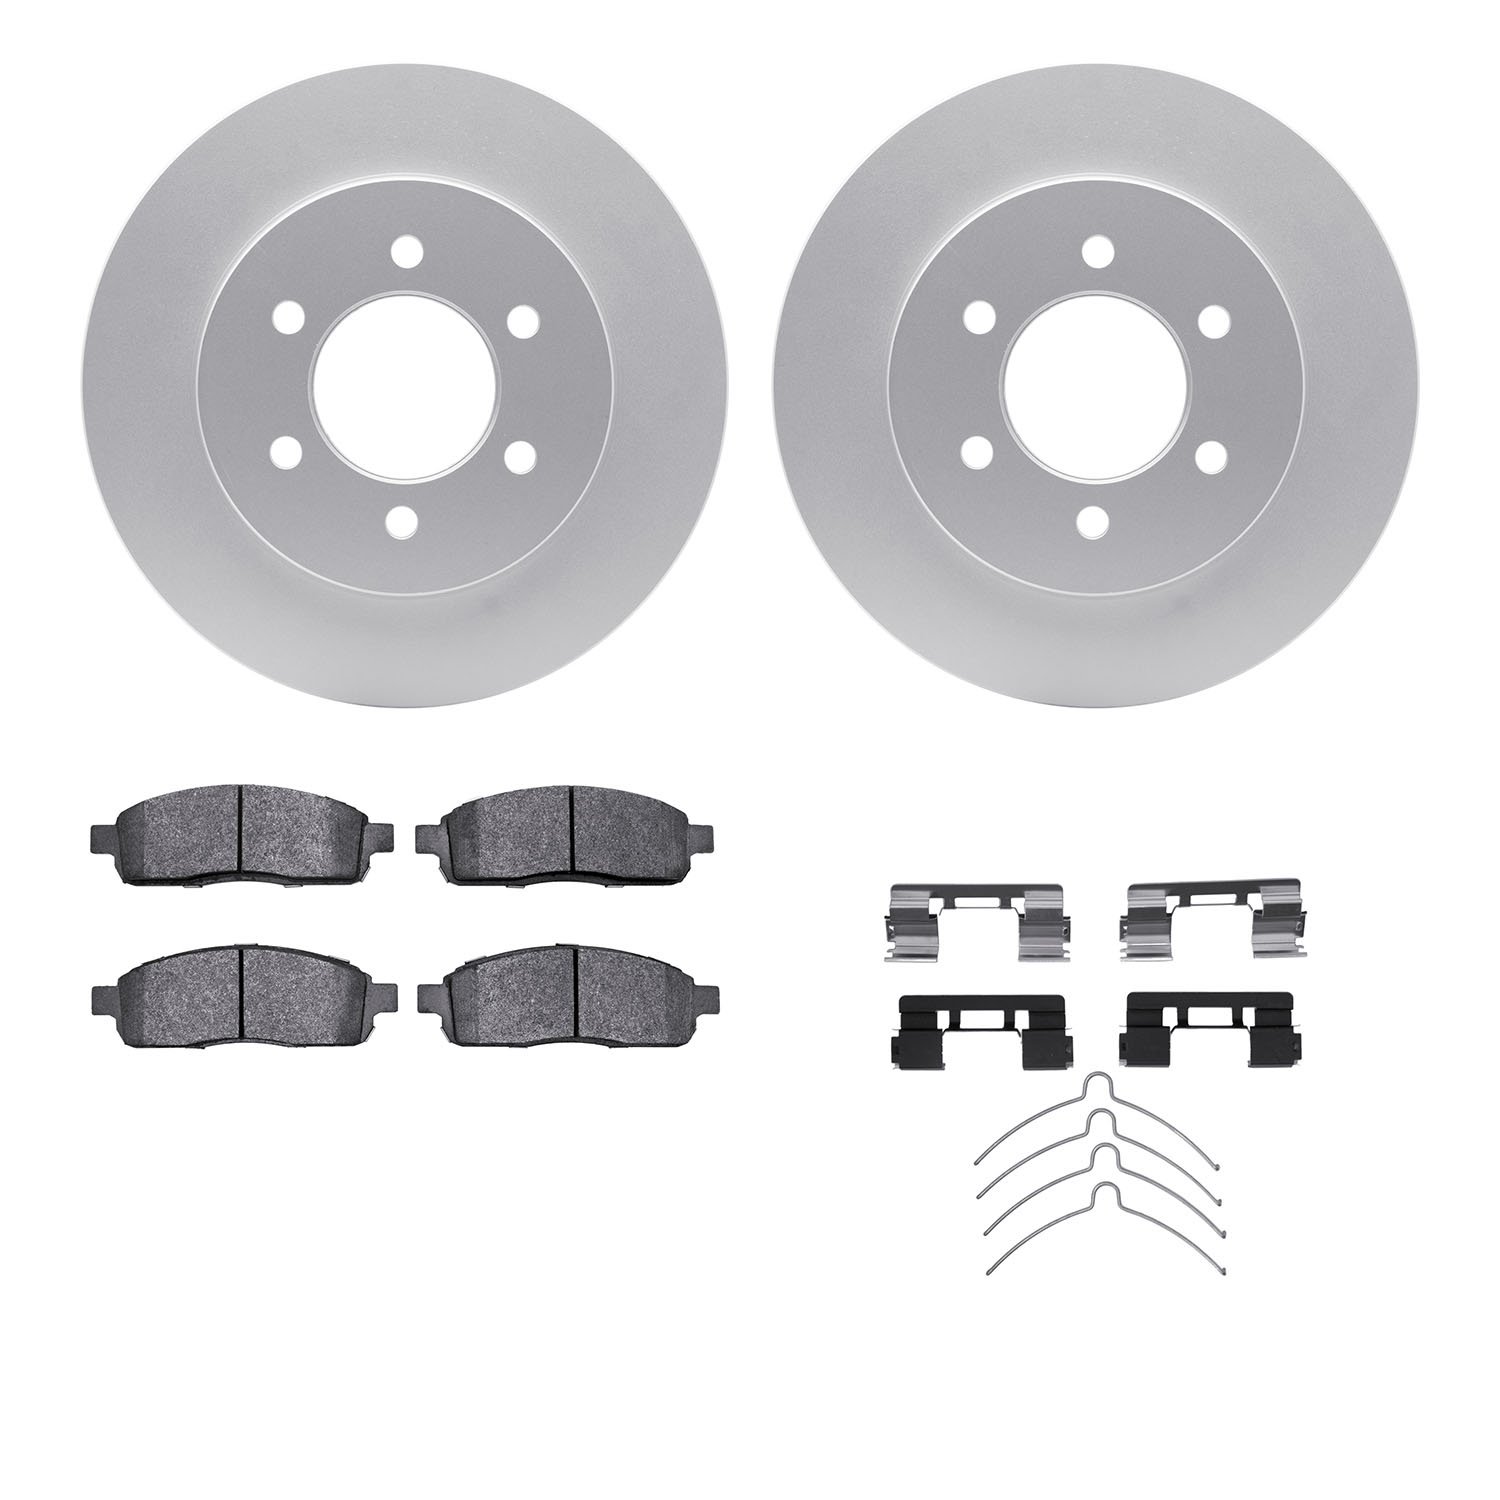 4412-54048 Geospec Brake Rotors with Ultimate-Duty Brake Pads & Hardware, 2004-2008 Ford/Lincoln/Mercury/Mazda, Position: Front